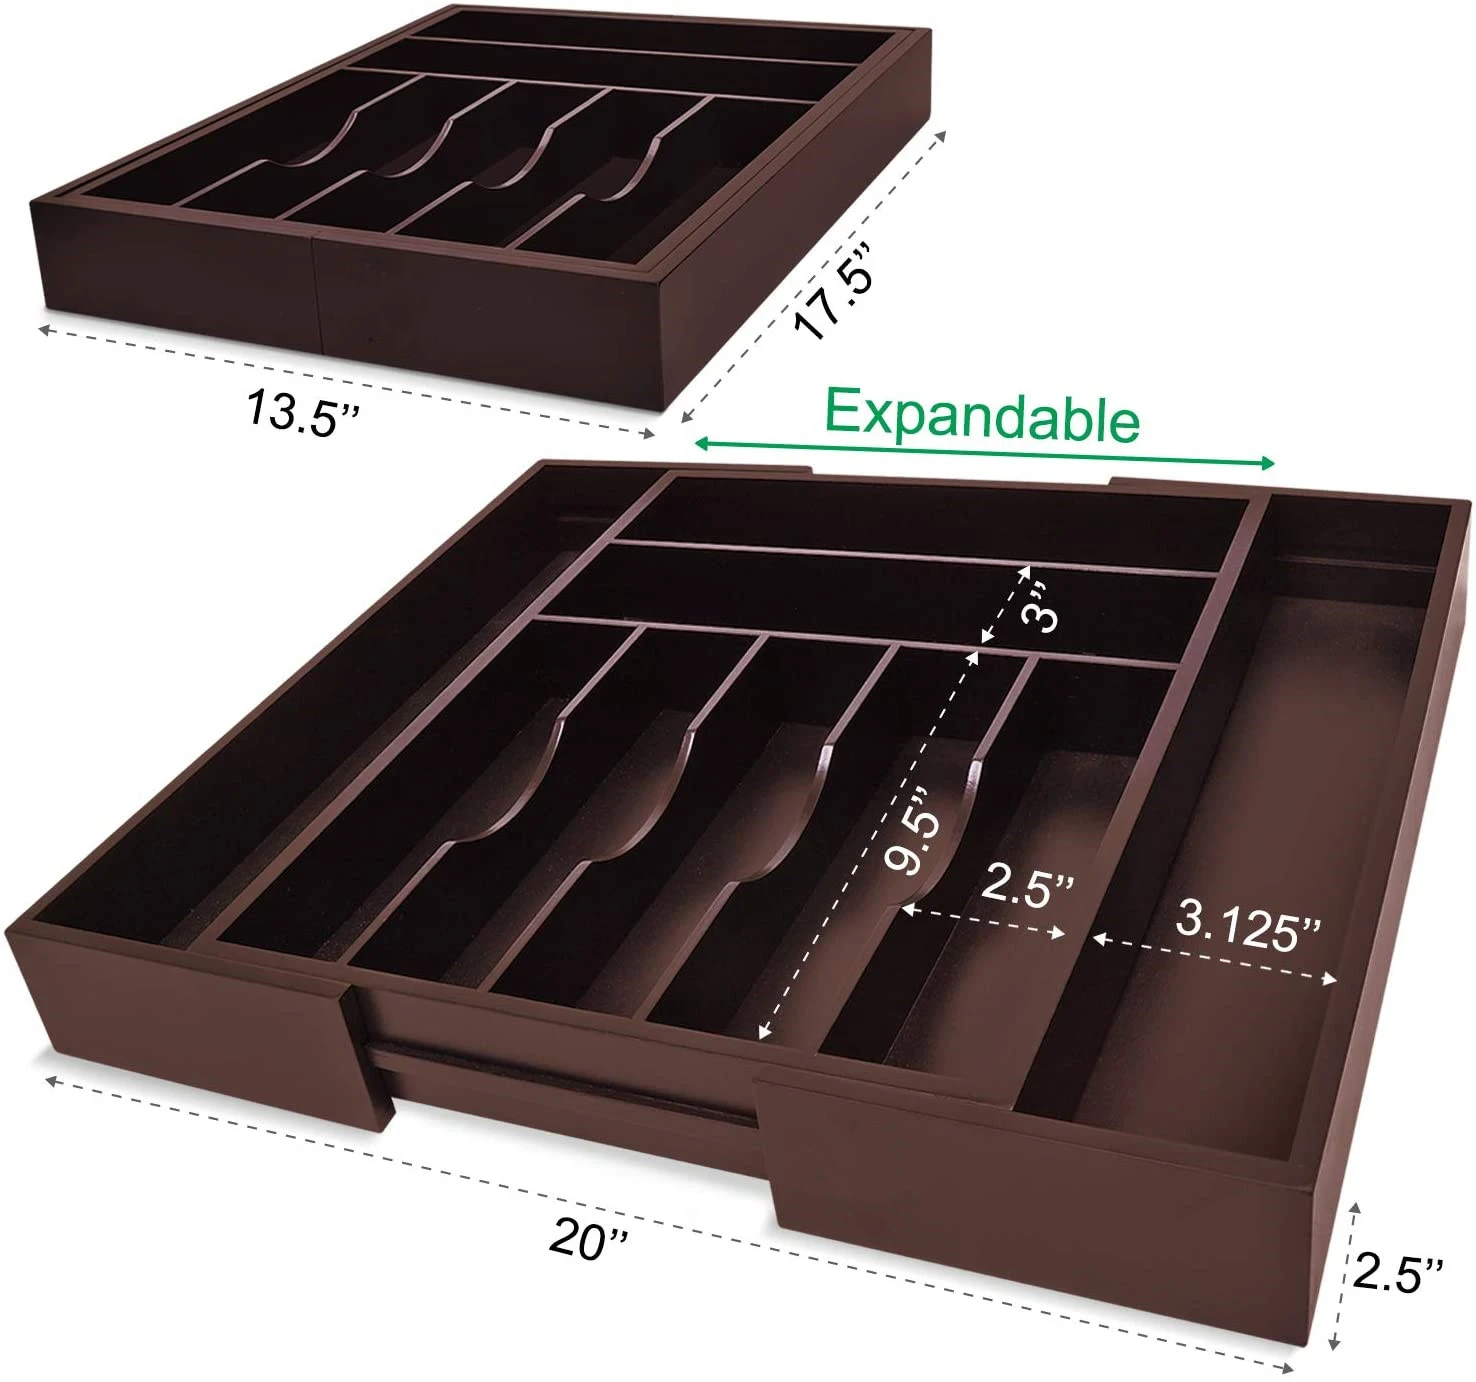 Factory Expandable High Quality Bamboo Kitchen Drawer Dividers for Kitchen Use Brown